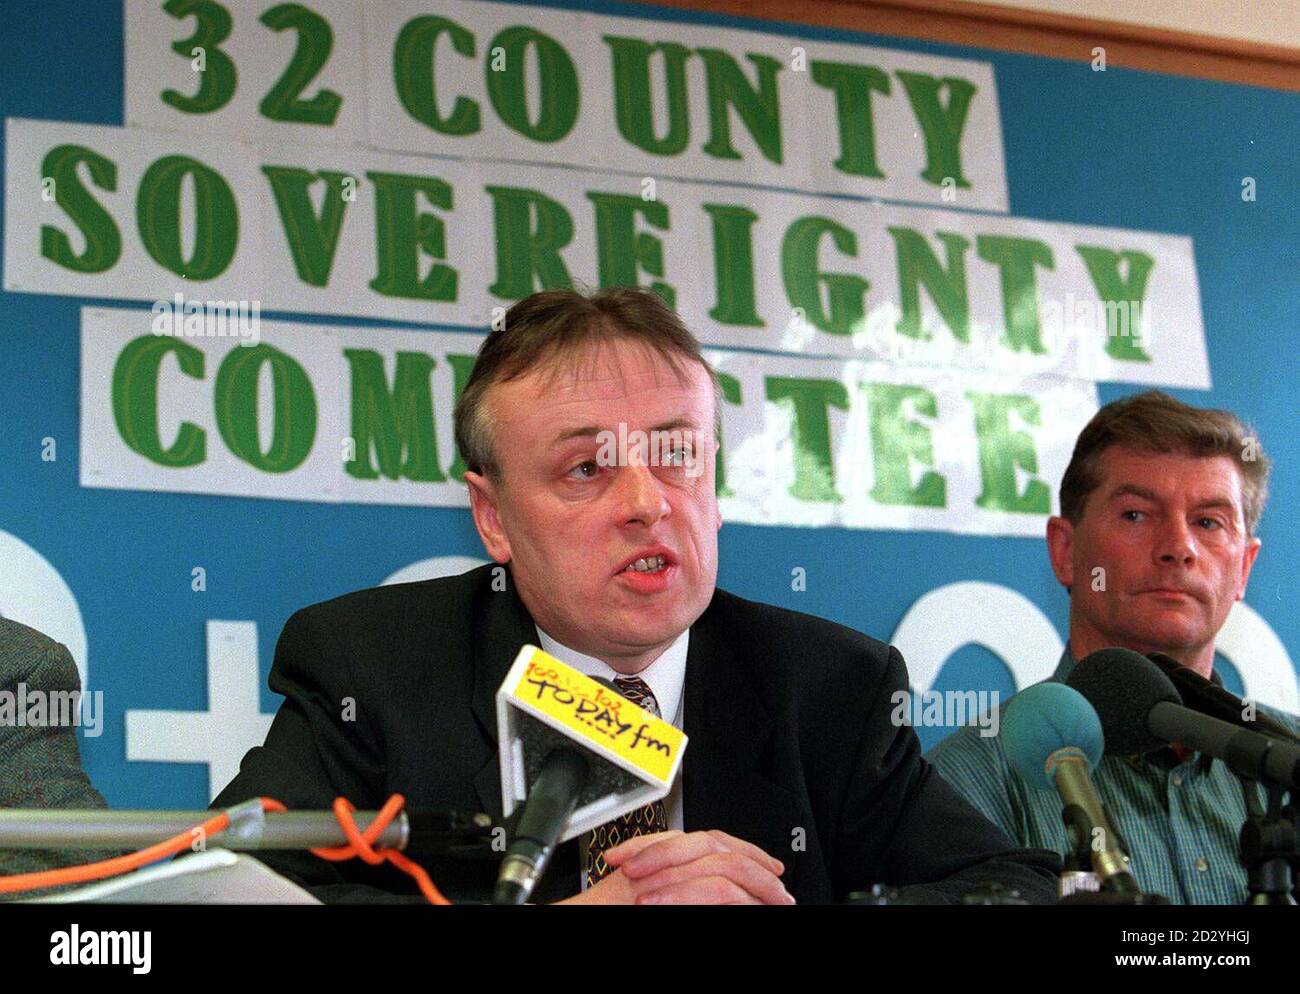 Francie Mackie a members of the 32 County Sovereignty Committee who left Sinn Fein due to disagreement over peace talks, put forward their views at during a news conference at the Imperial Hotel in Dundalk. PA Photos. Stock Photo